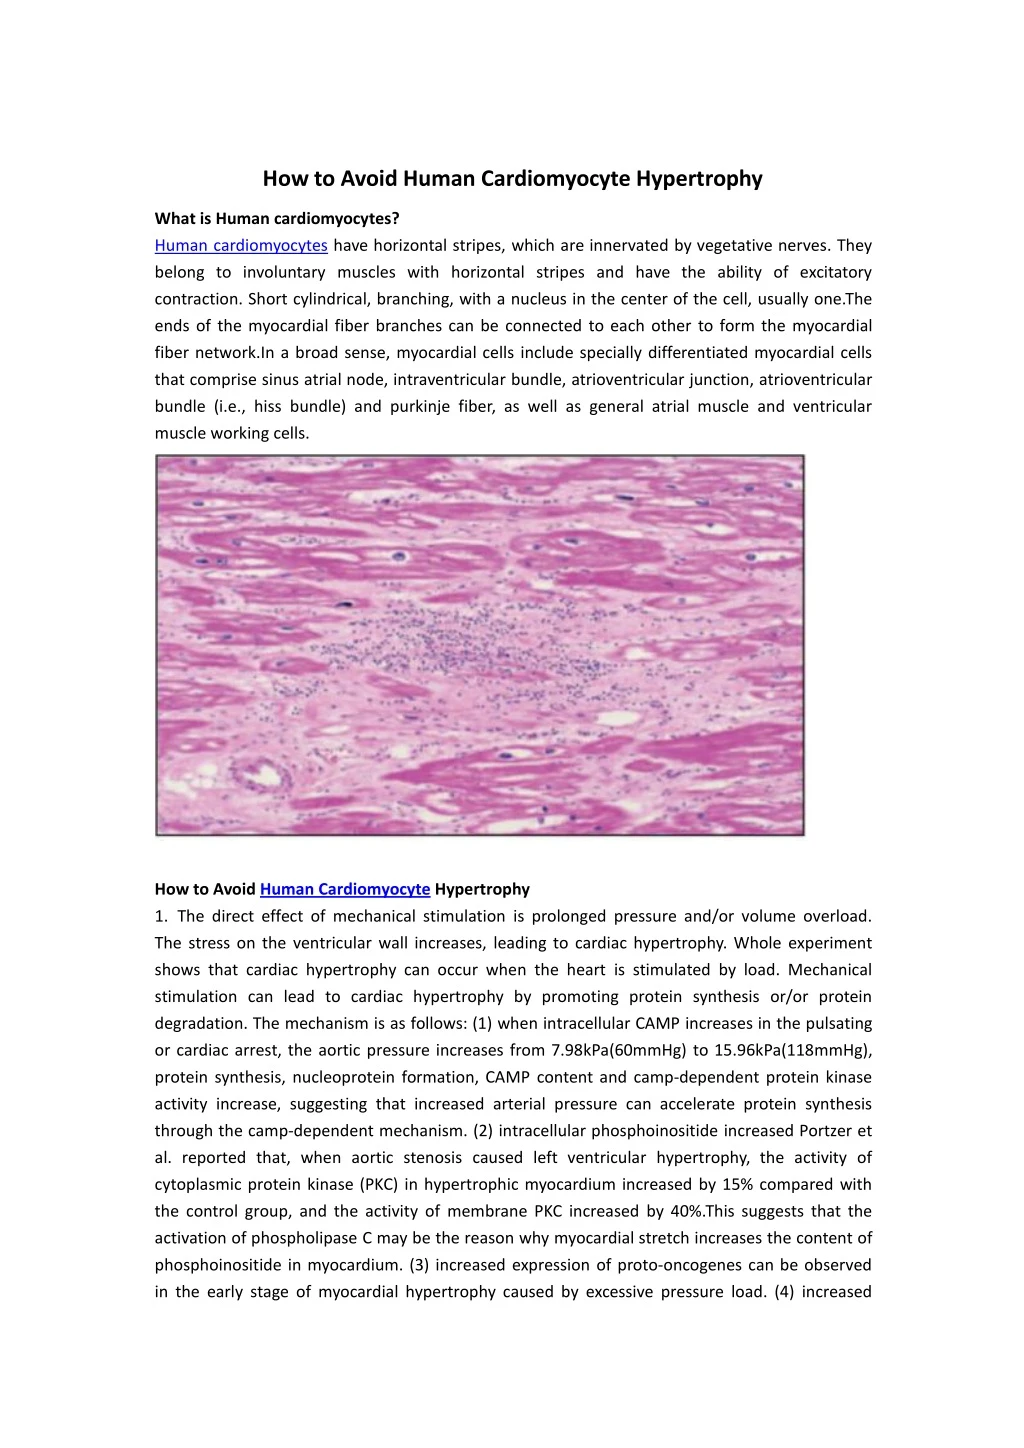 how to avoid human cardiomyocyte hypertrophy